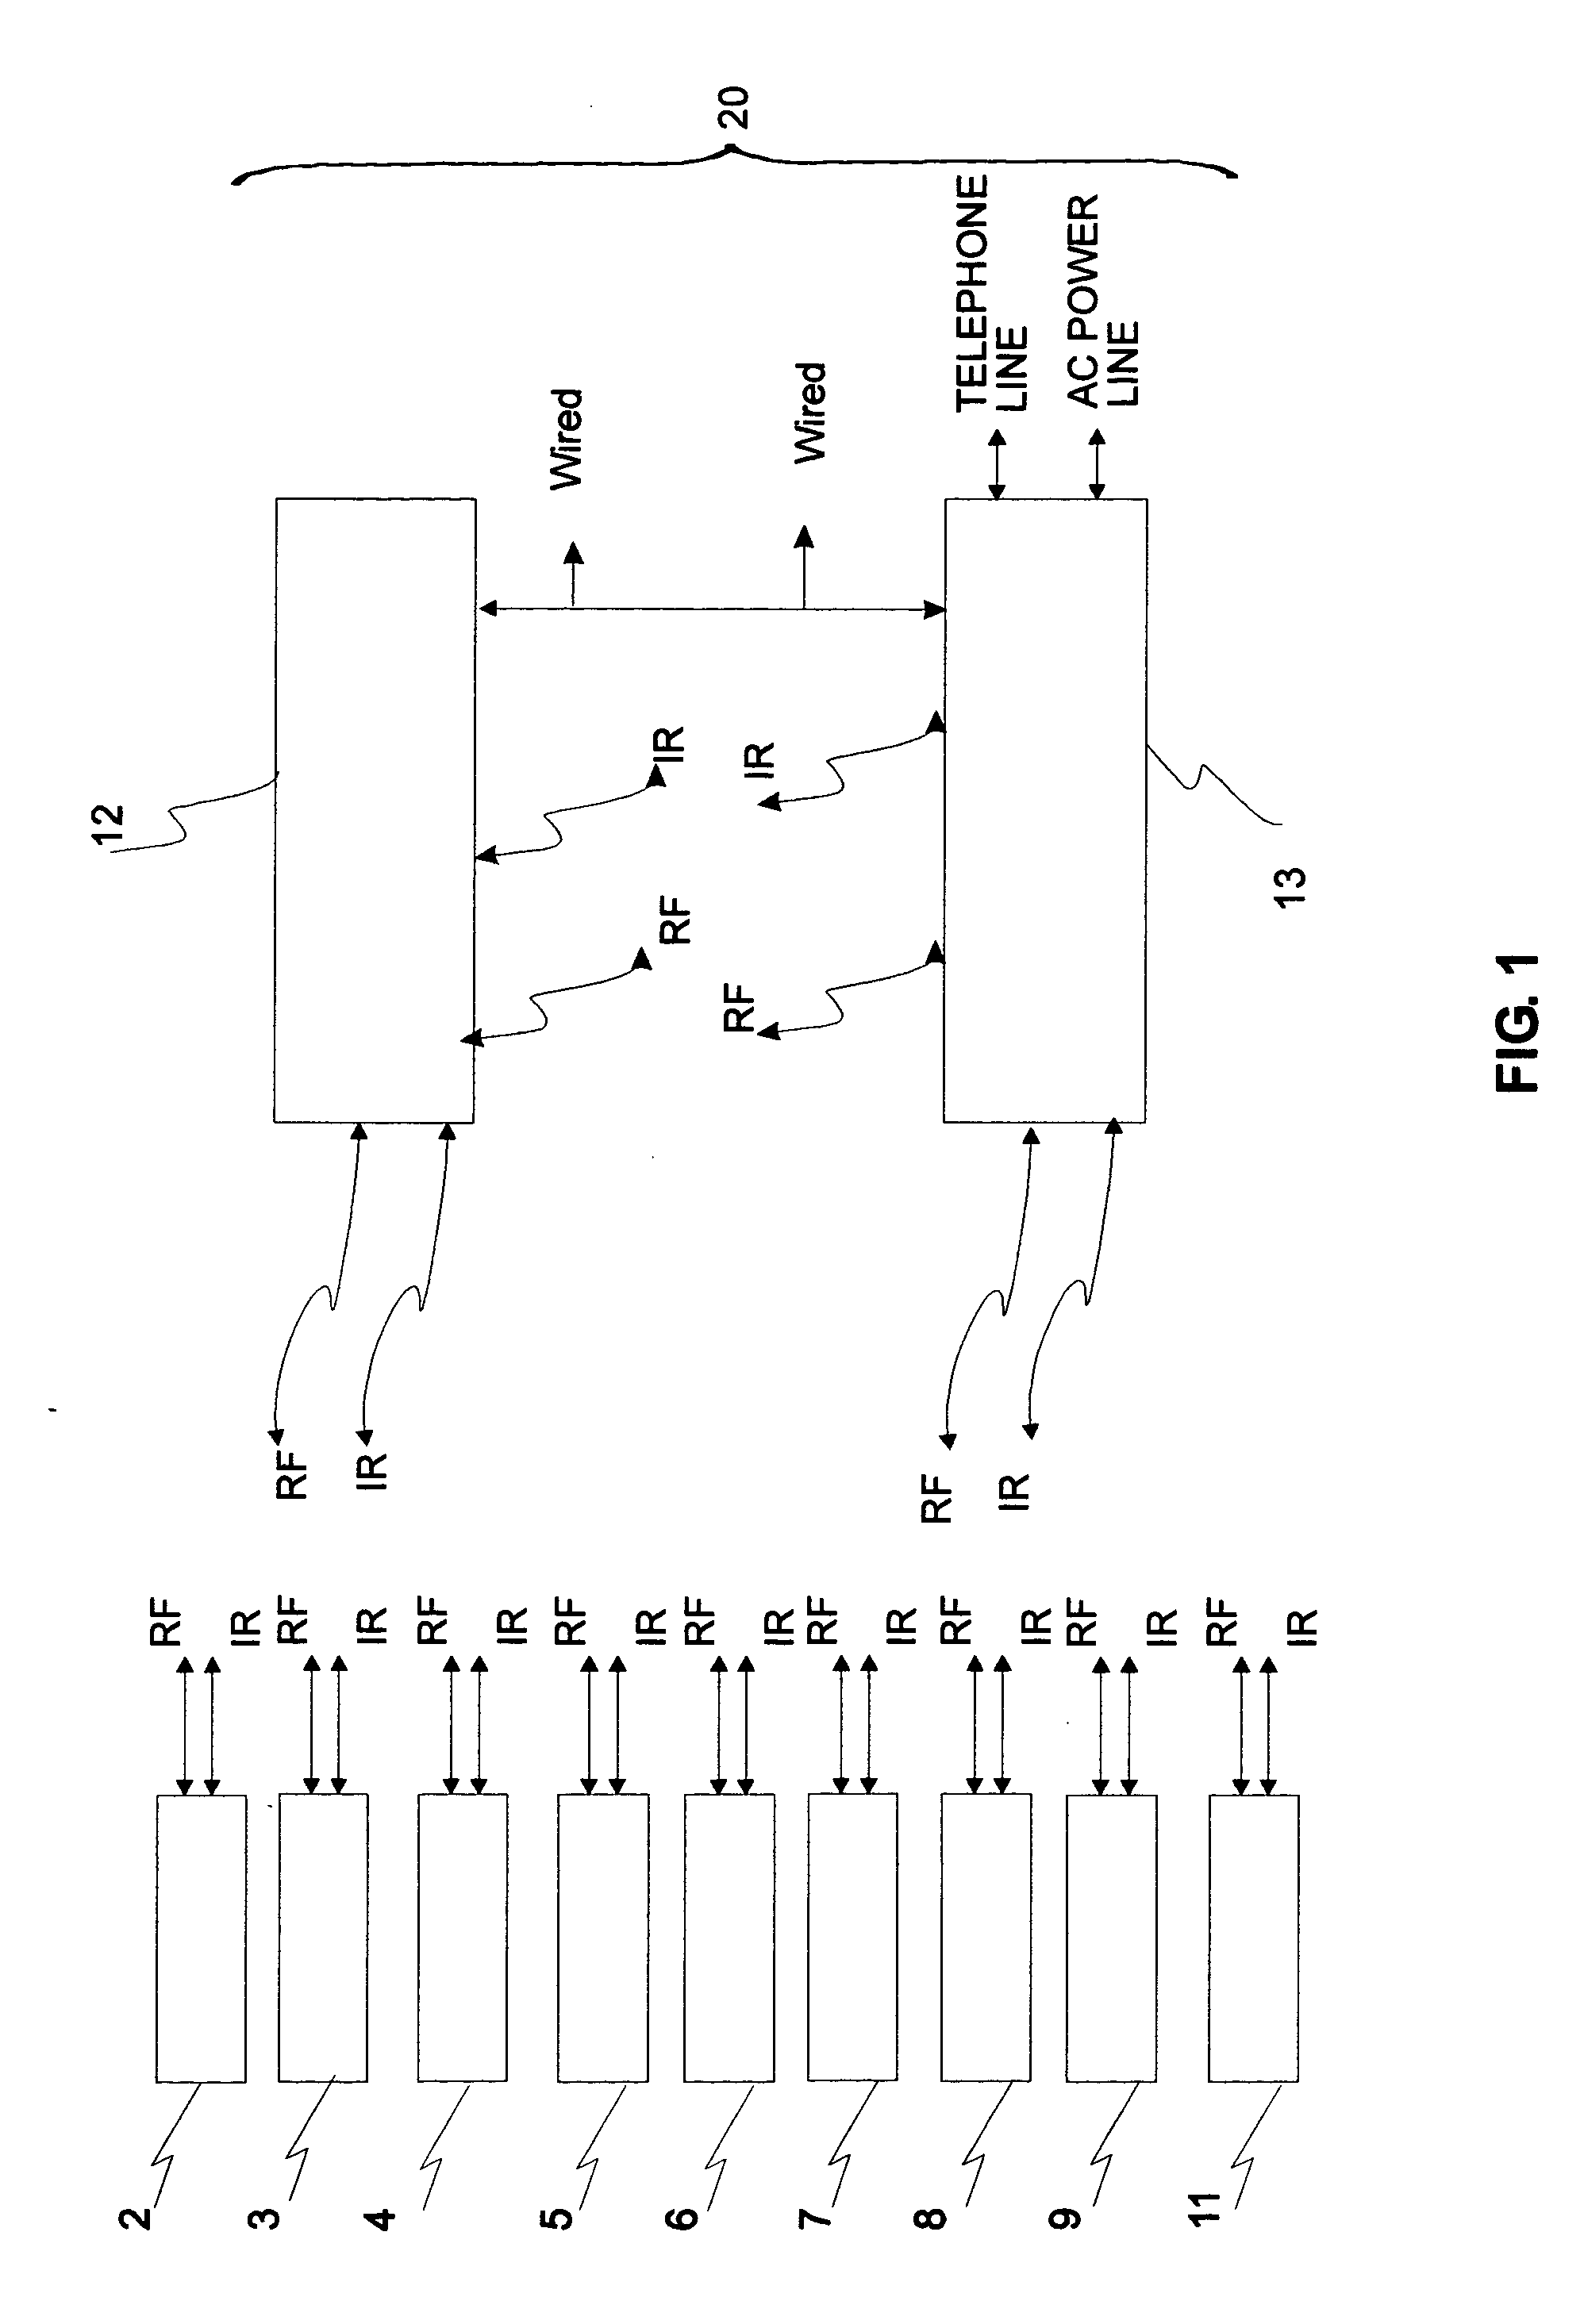 Communications, command, and control system with plug-and-play connectivity